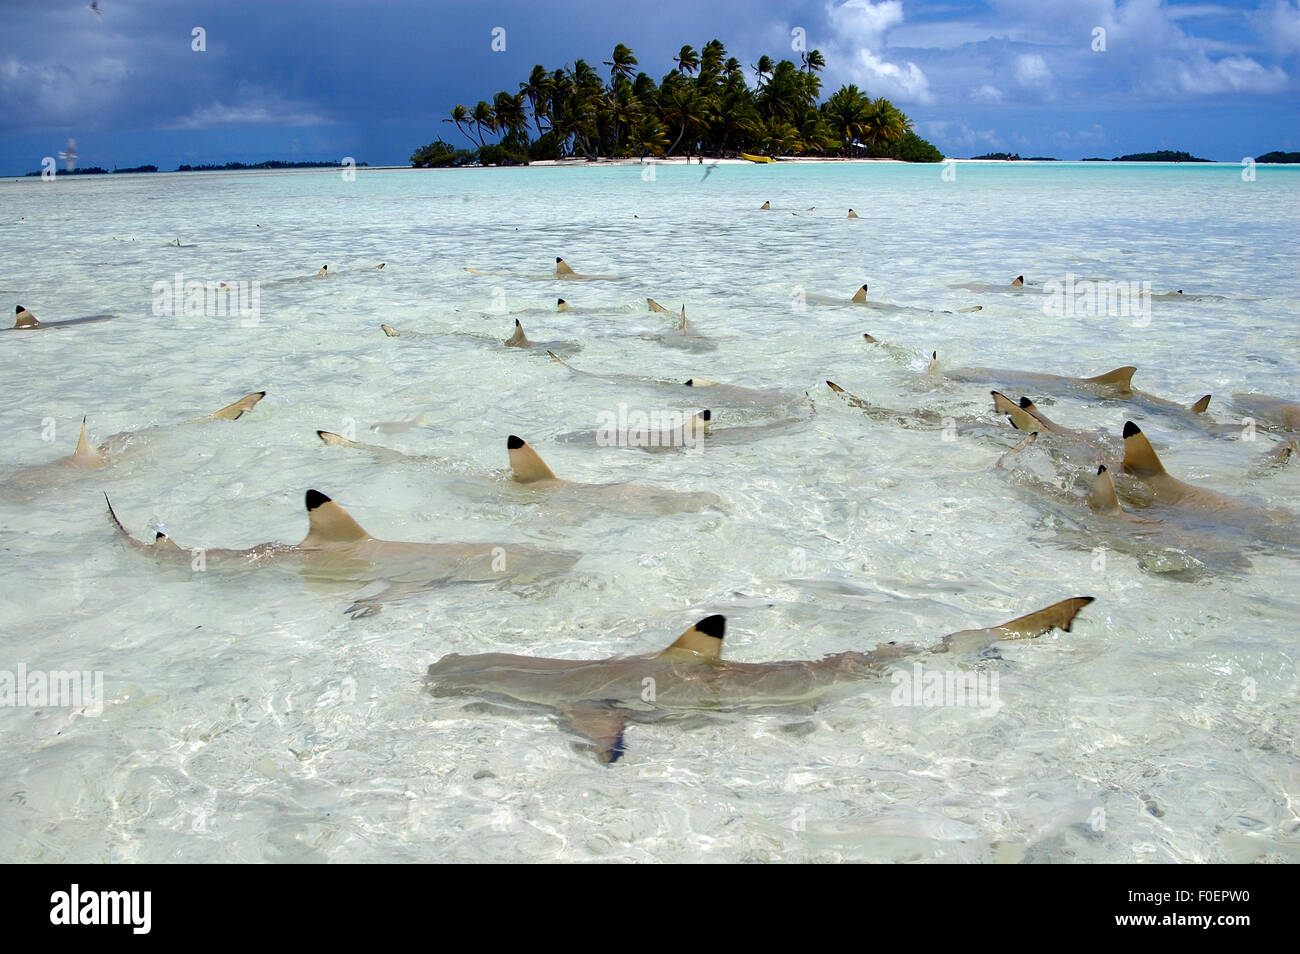 BLACKTIP REEF SHARK SWIMMING IN SHALLOW WATER AT THE BEACH Stock Photo